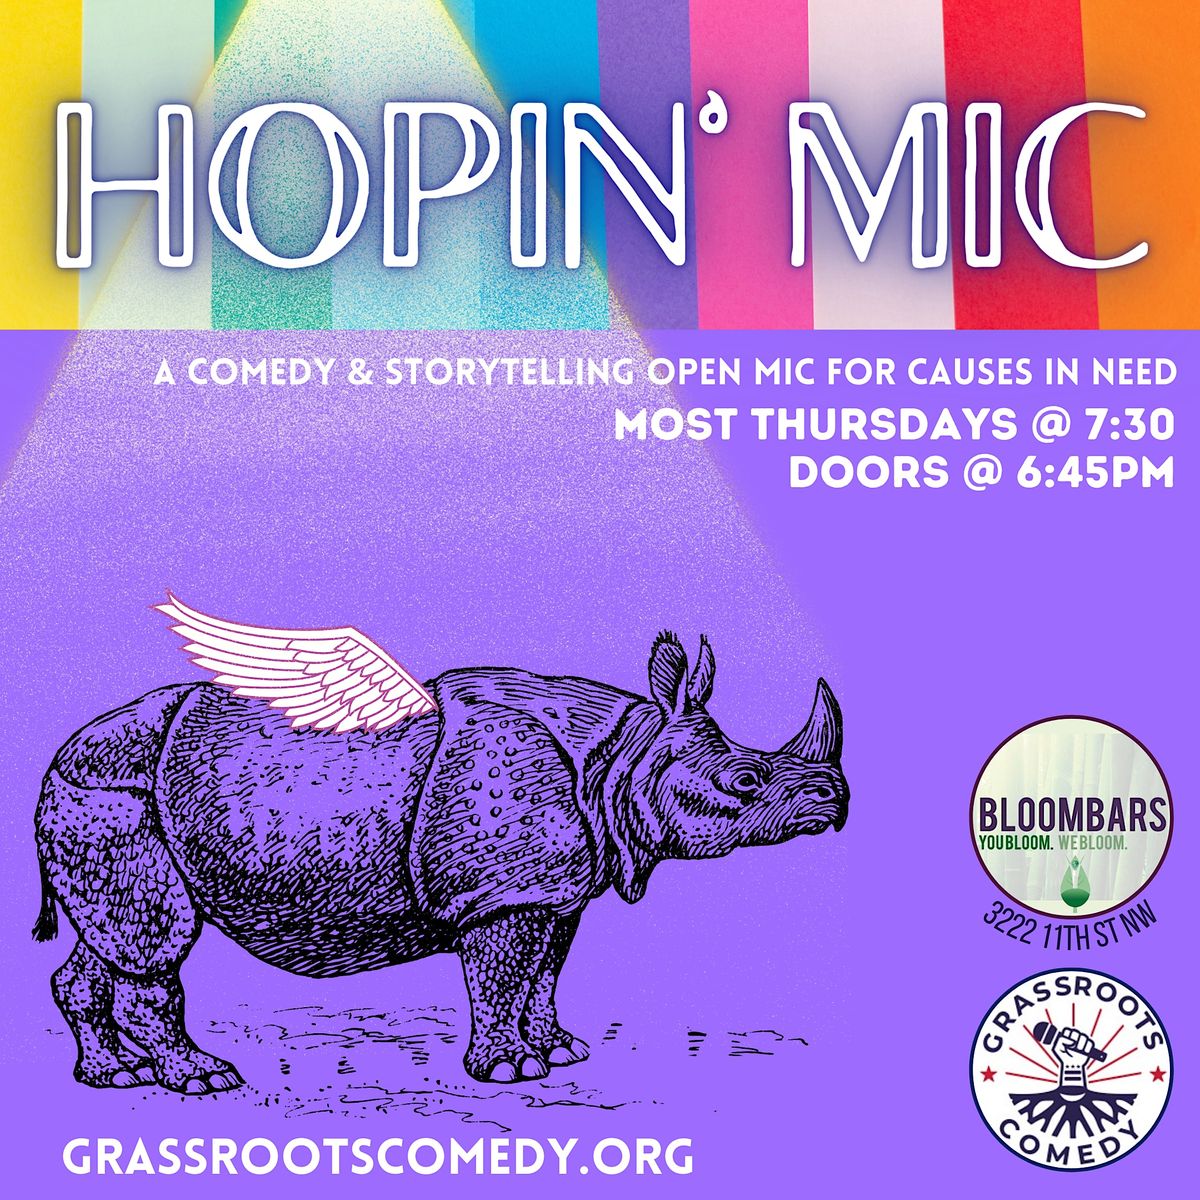 Hopin' Mic: A Comedy & Storytelling Open Mic for Causes in Need